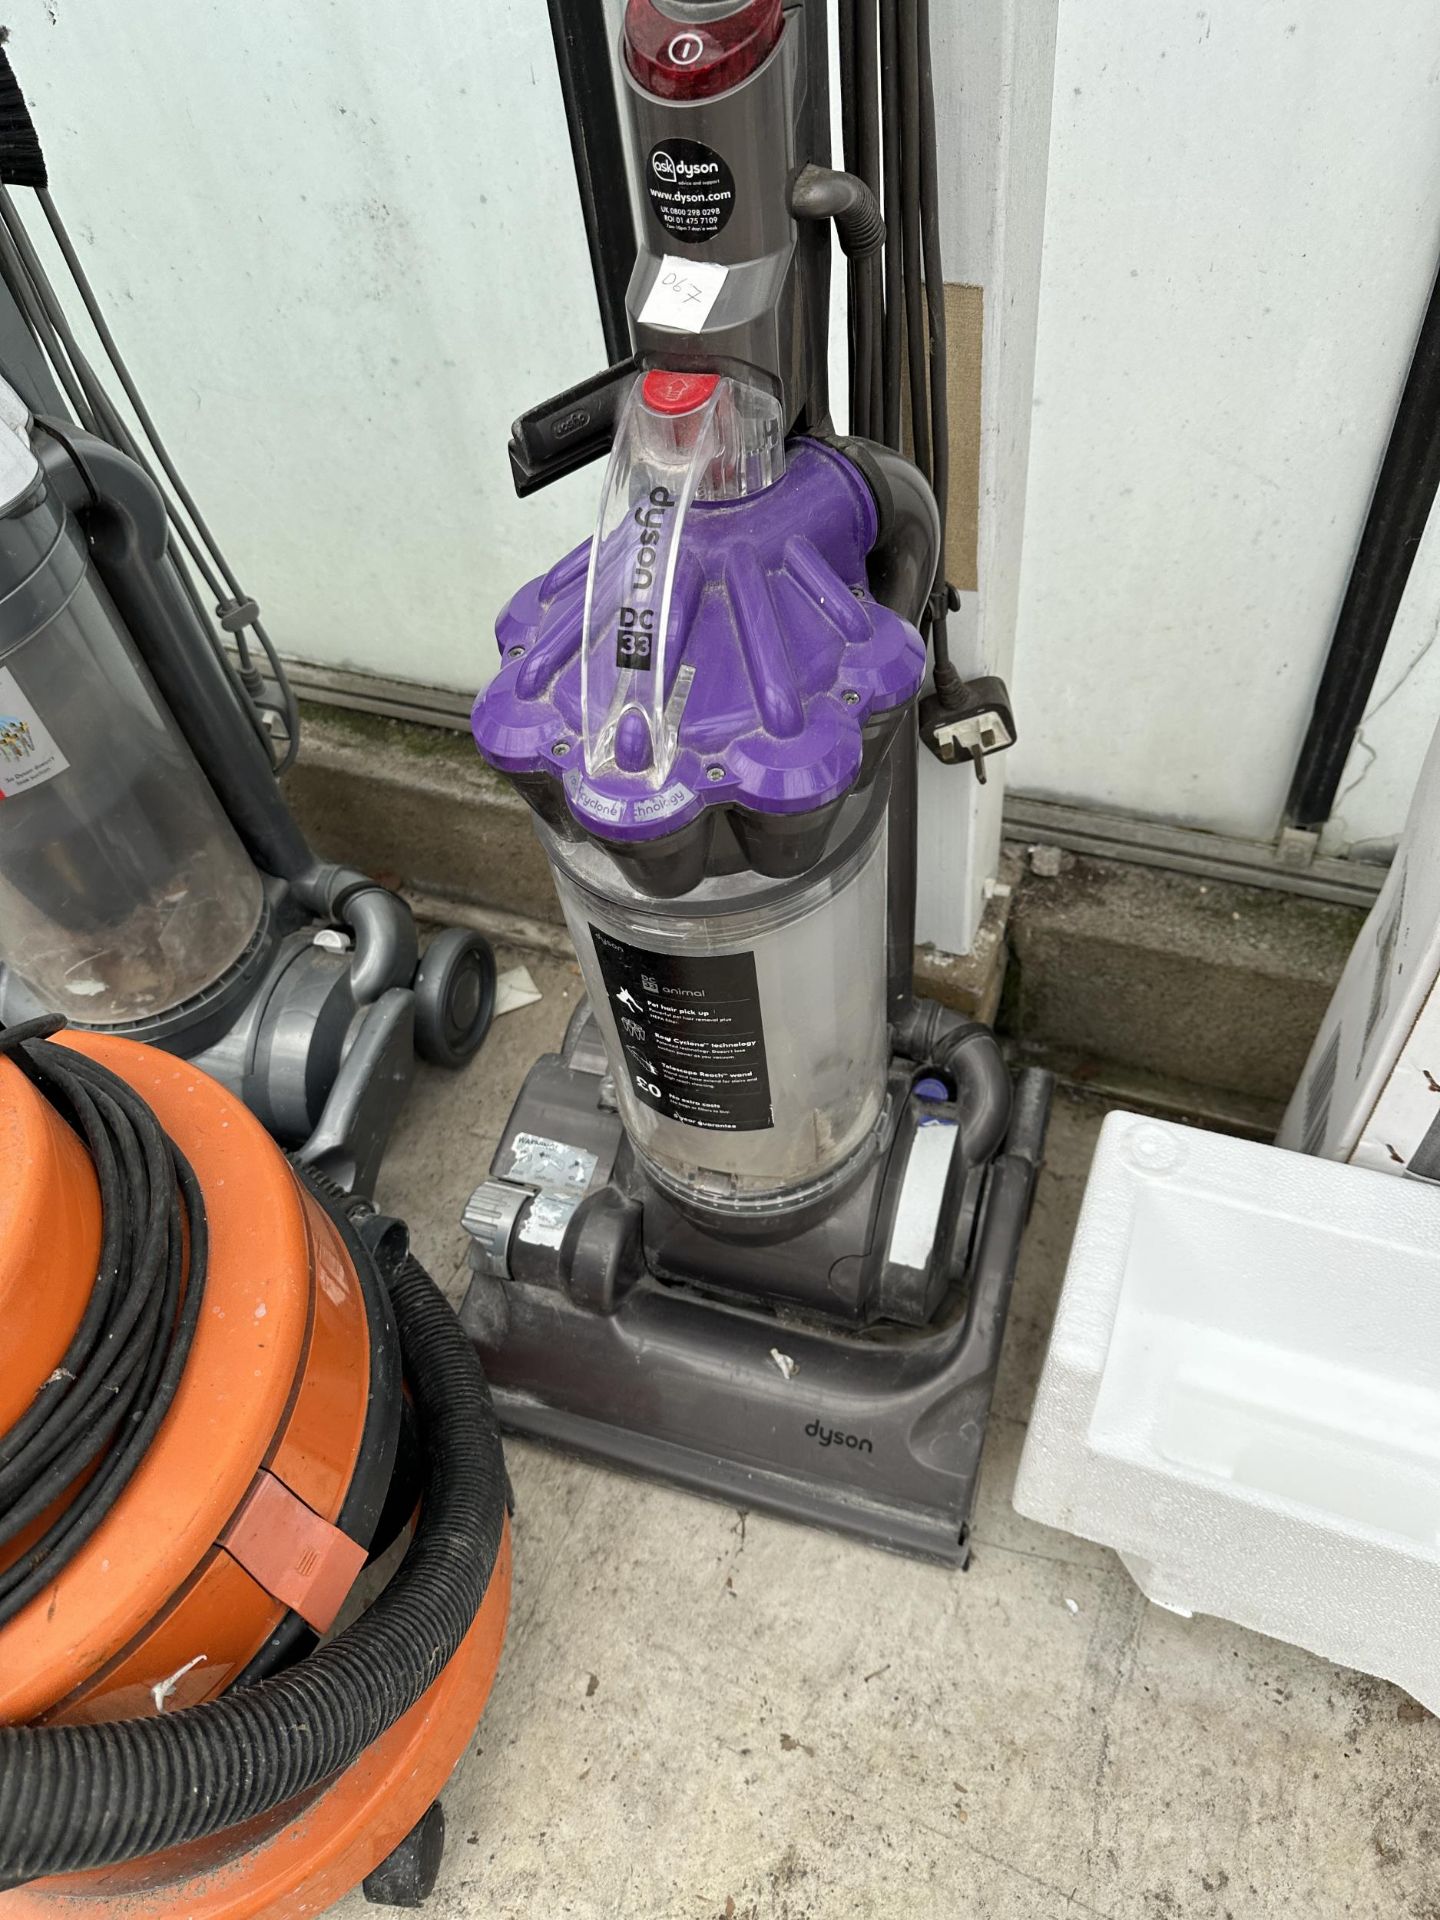 THREE VARIOUS VACUUM CLEANERS TO INCLUDE TWO DYSONS - Image 4 of 4